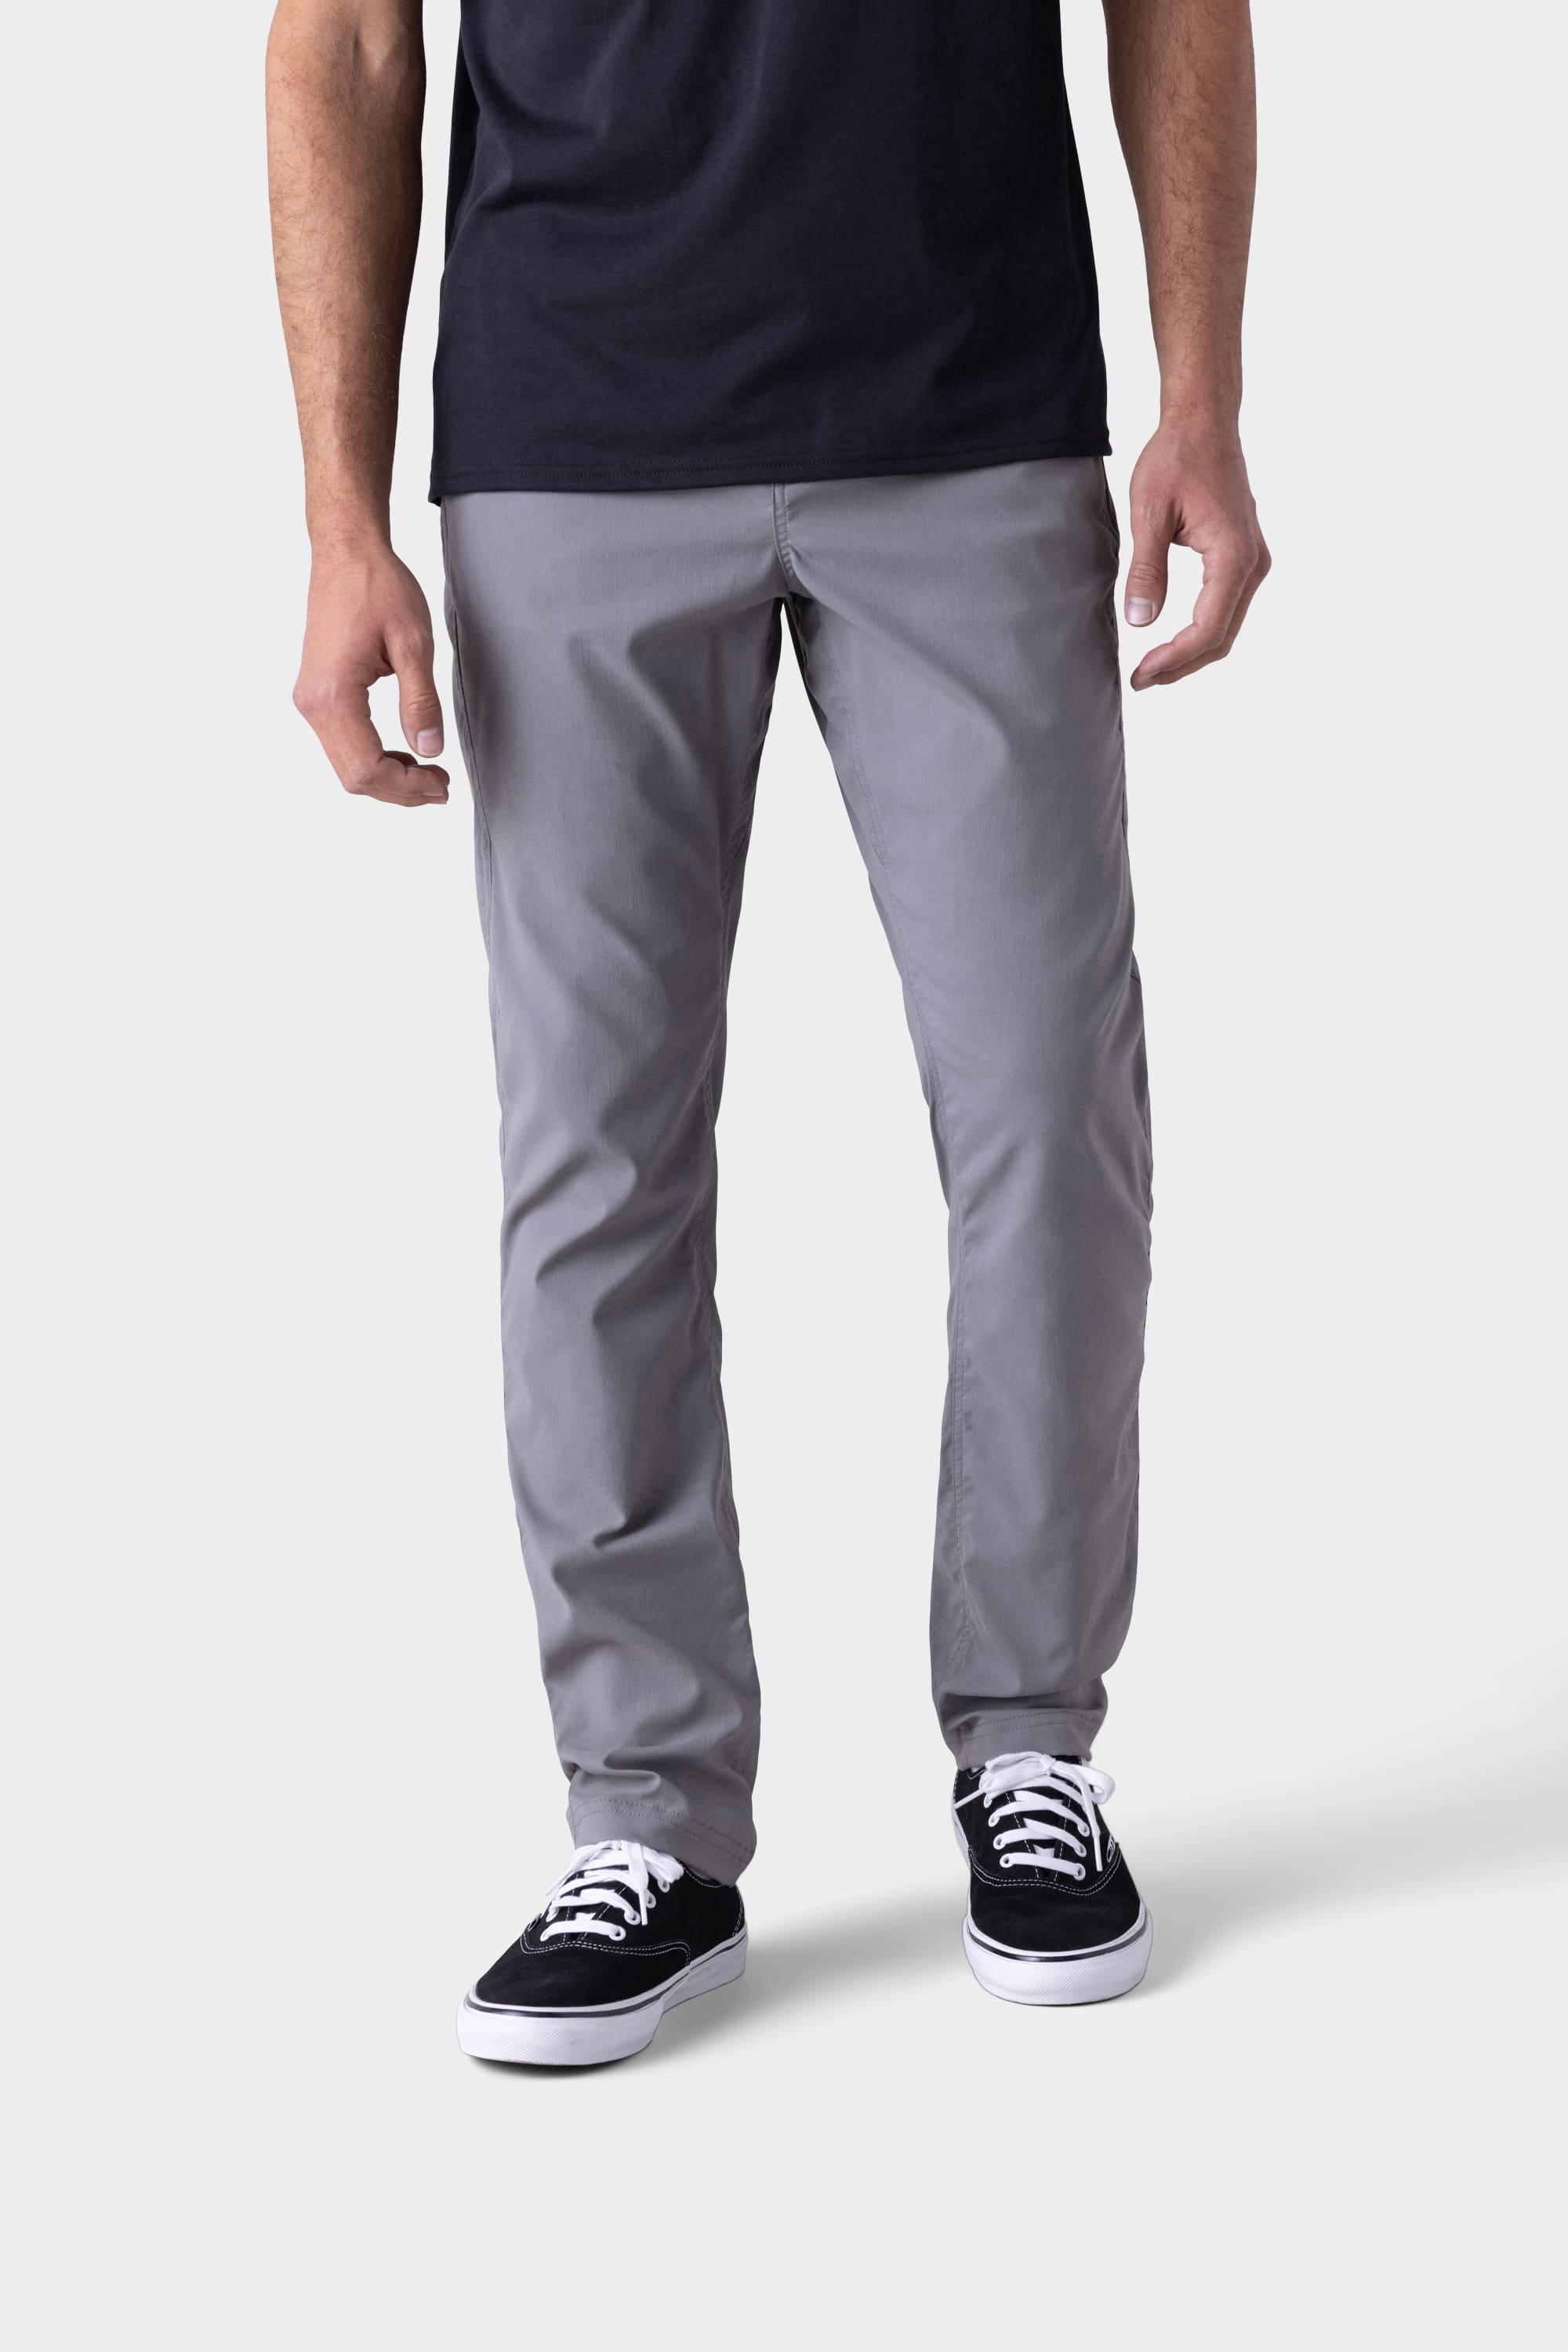 Chino Pant Size Guide